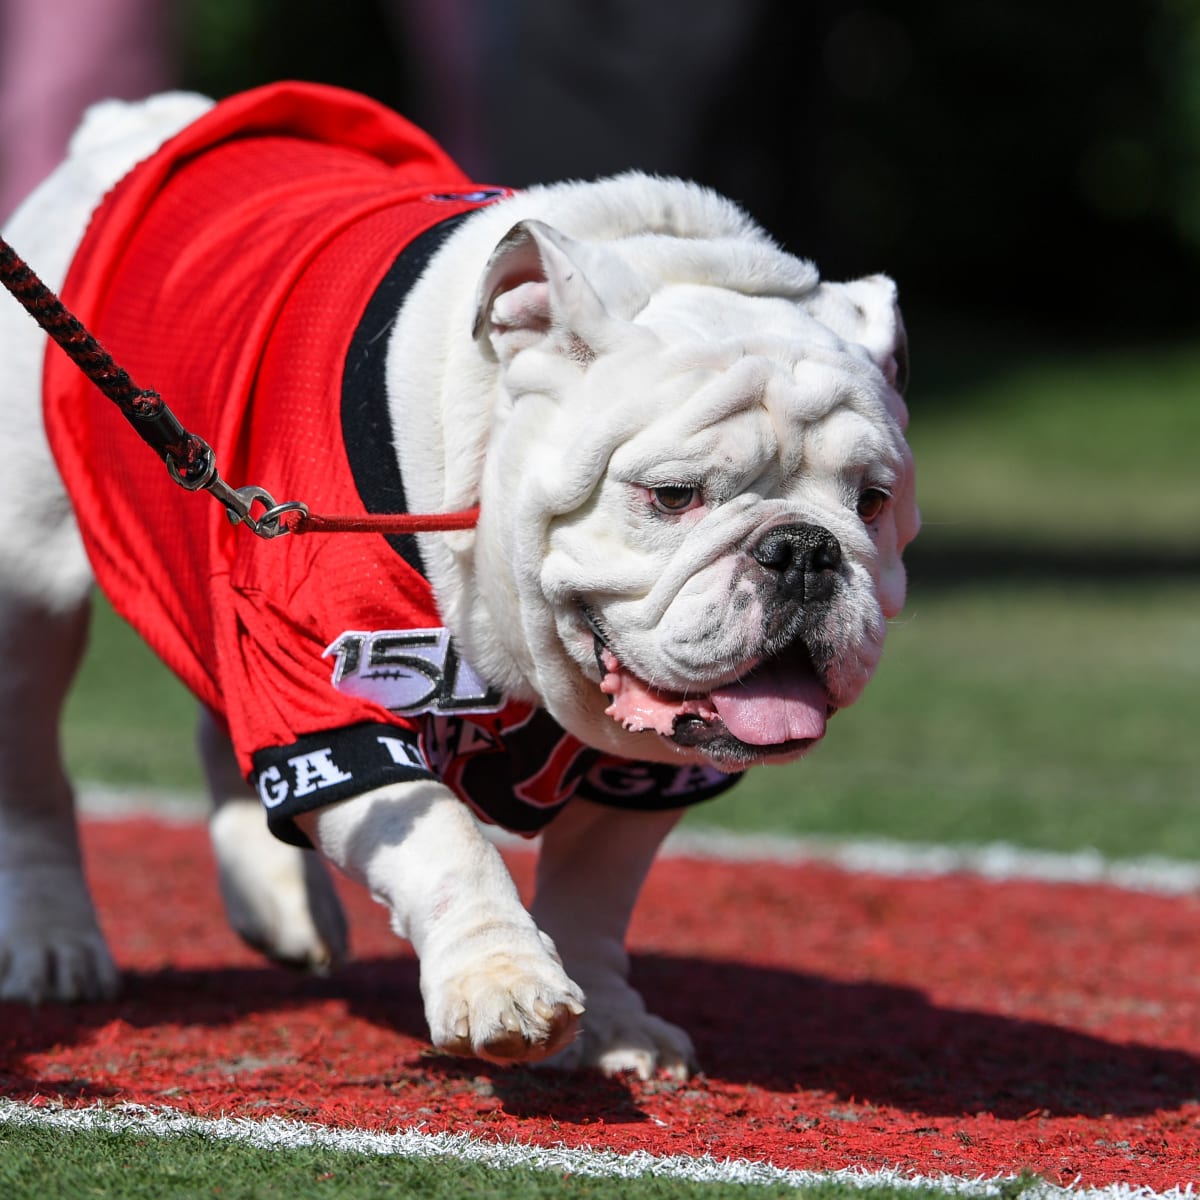 Why are Georgia Bulldogs and Atlanta Braves fans so patient?